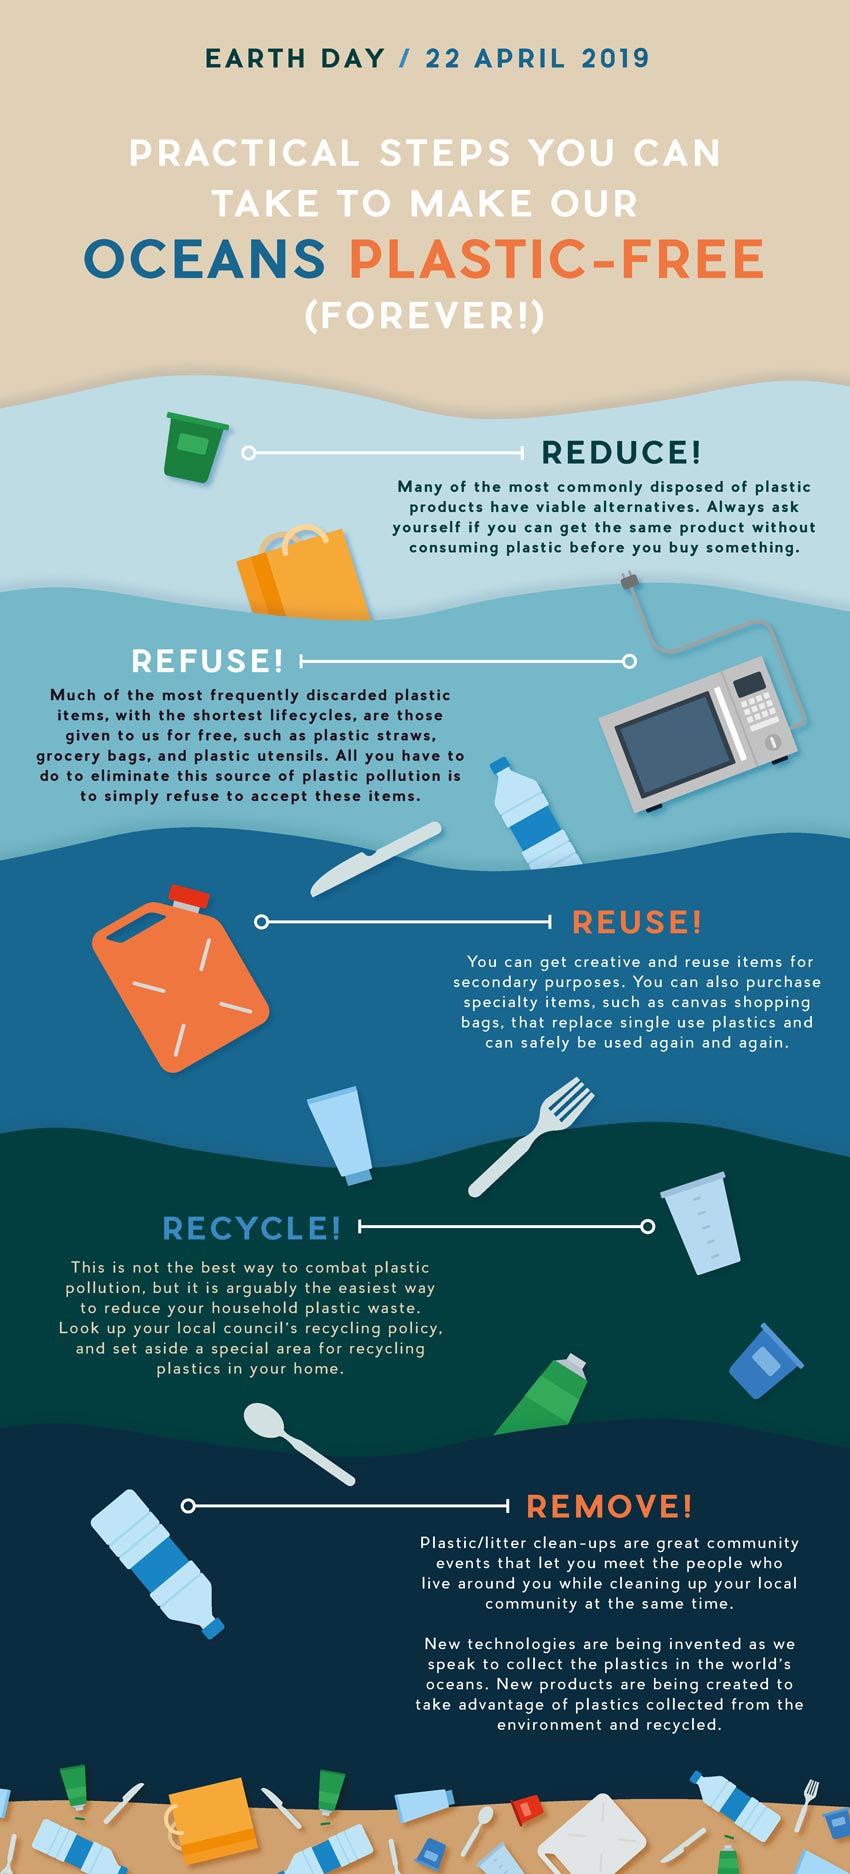 Stop Using Plastic Straws, Stop Plastic Pollution-Reduce, The